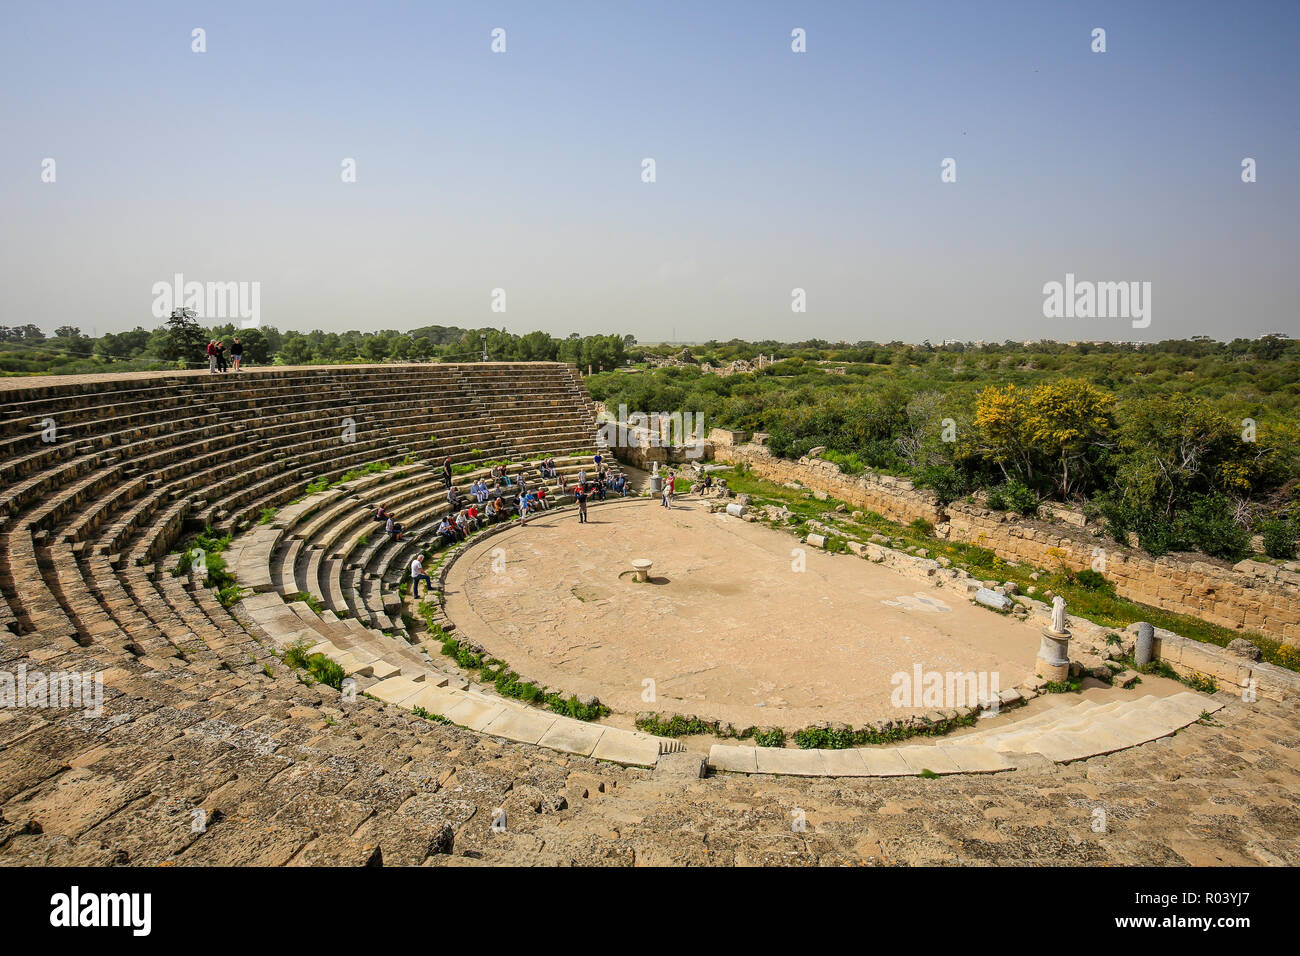 Famagusta, Turkish Republic of Northern Cyprus, Cyprus - Salamis, archaeological excavation site Stock Photo